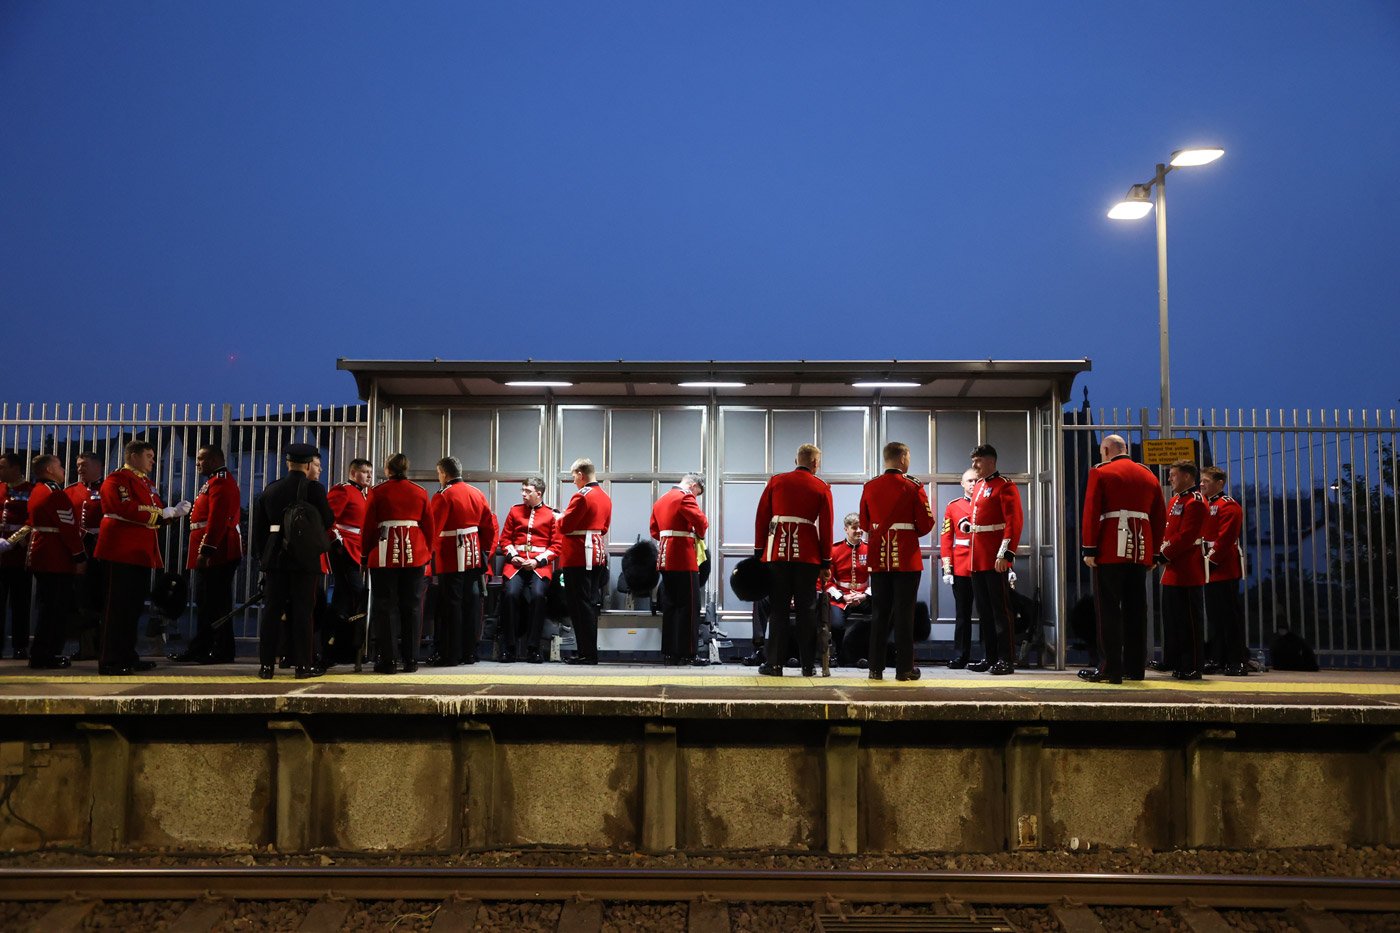 Members of the Armed Forces wait for a train in the early hours of Saturday morning